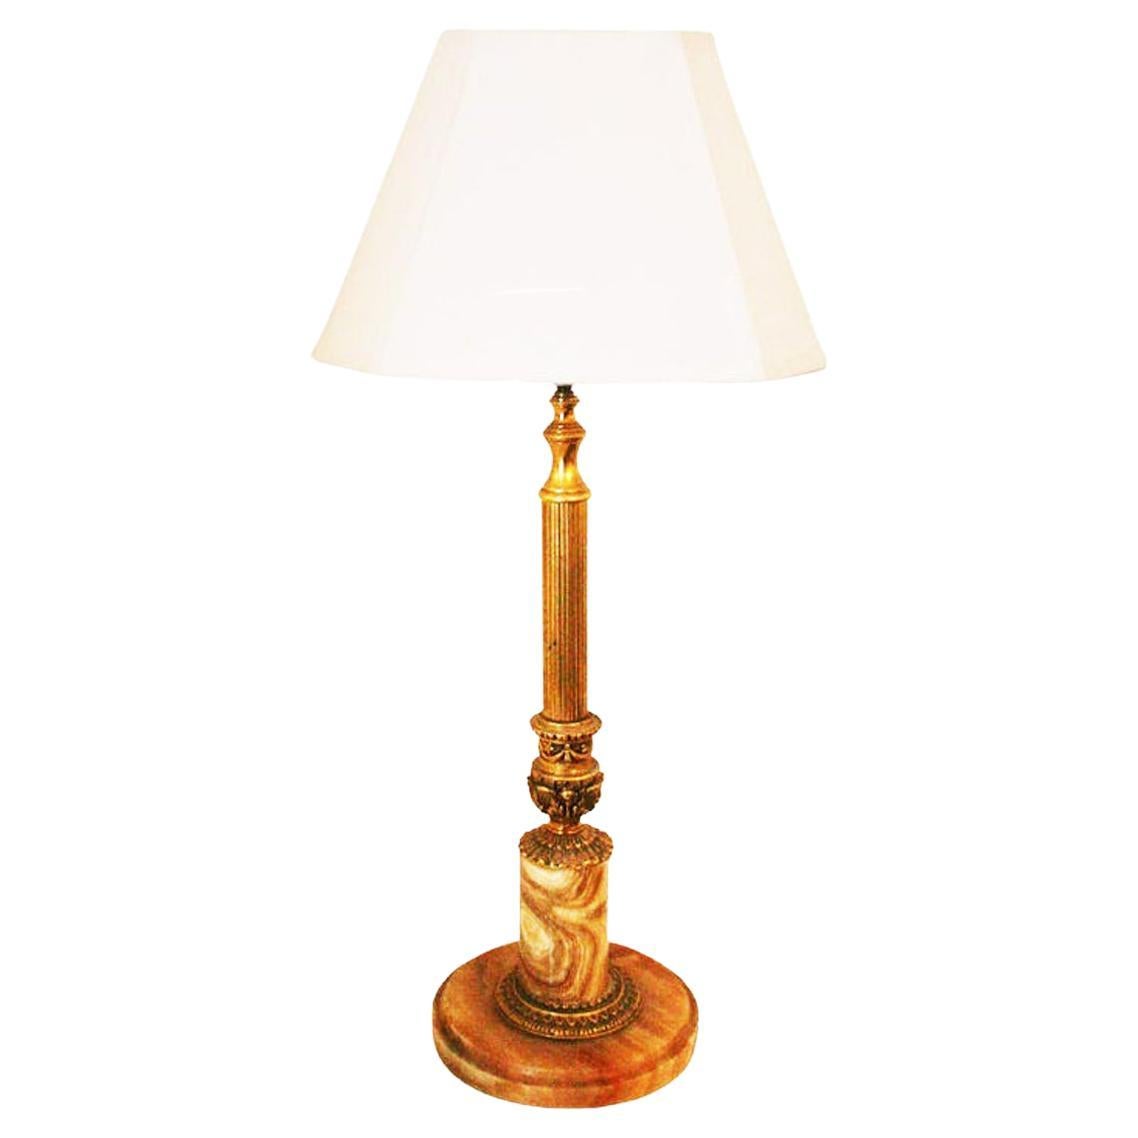 Alabaster table lamp Onix and Brass large column Form. Early 20th Century
Large table lamp in alabaster and brass style
Empire.

It is of high size, suitable to put on a side table in the living room or on a bedside table

In the shape of a